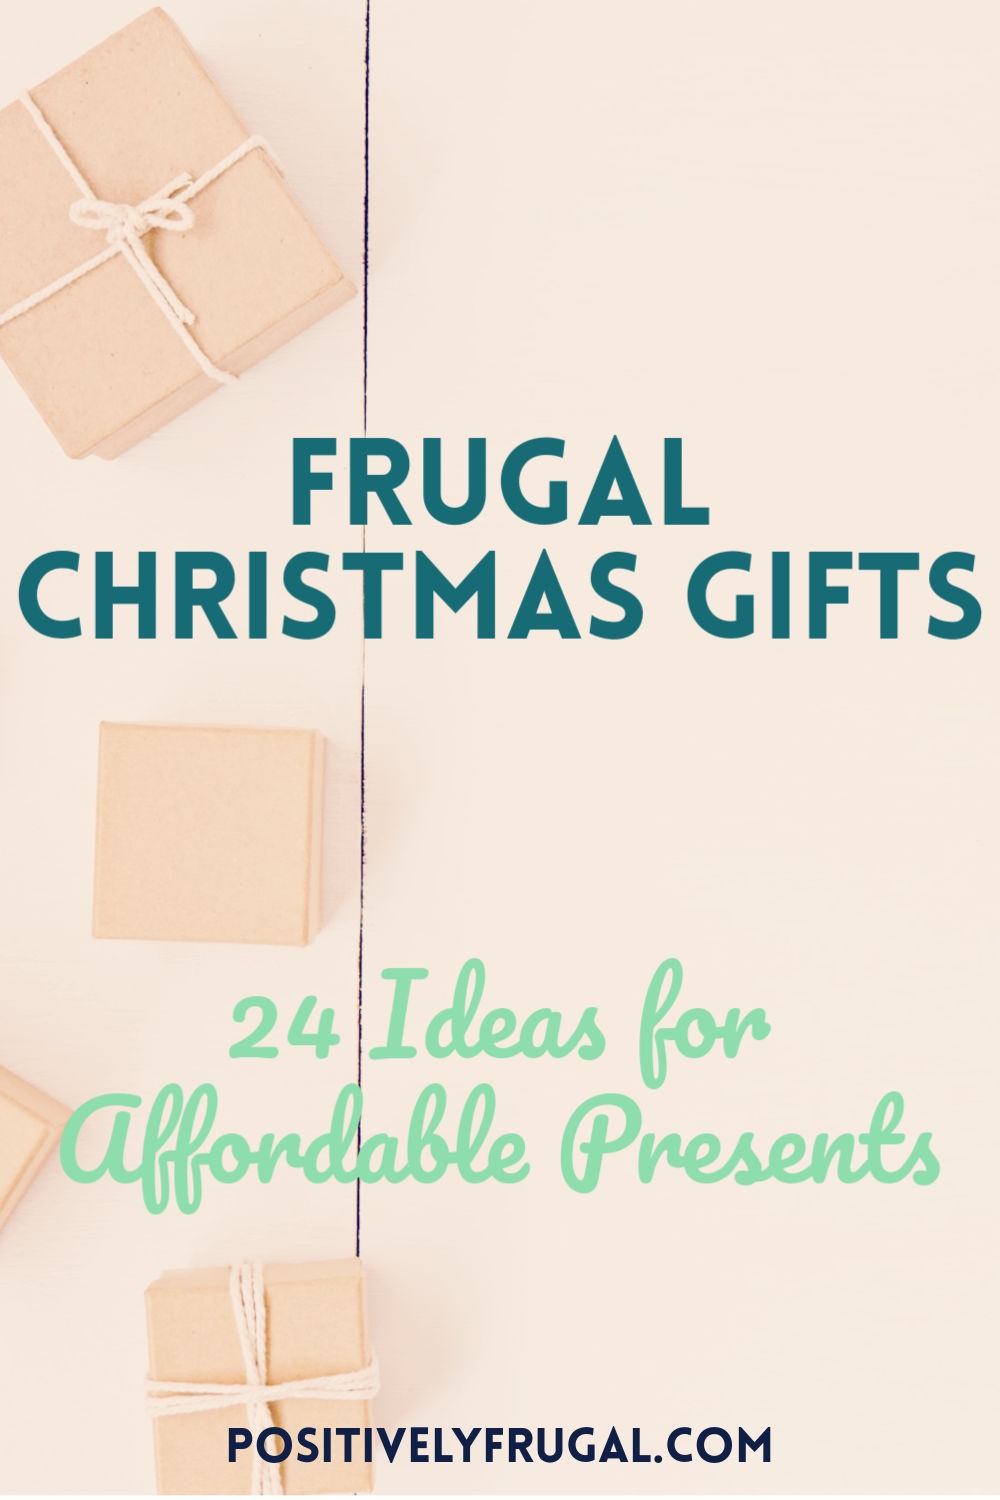 Frugal Christmas Gifts Ideas for Affordable Presents by PositivelyFrugal.com